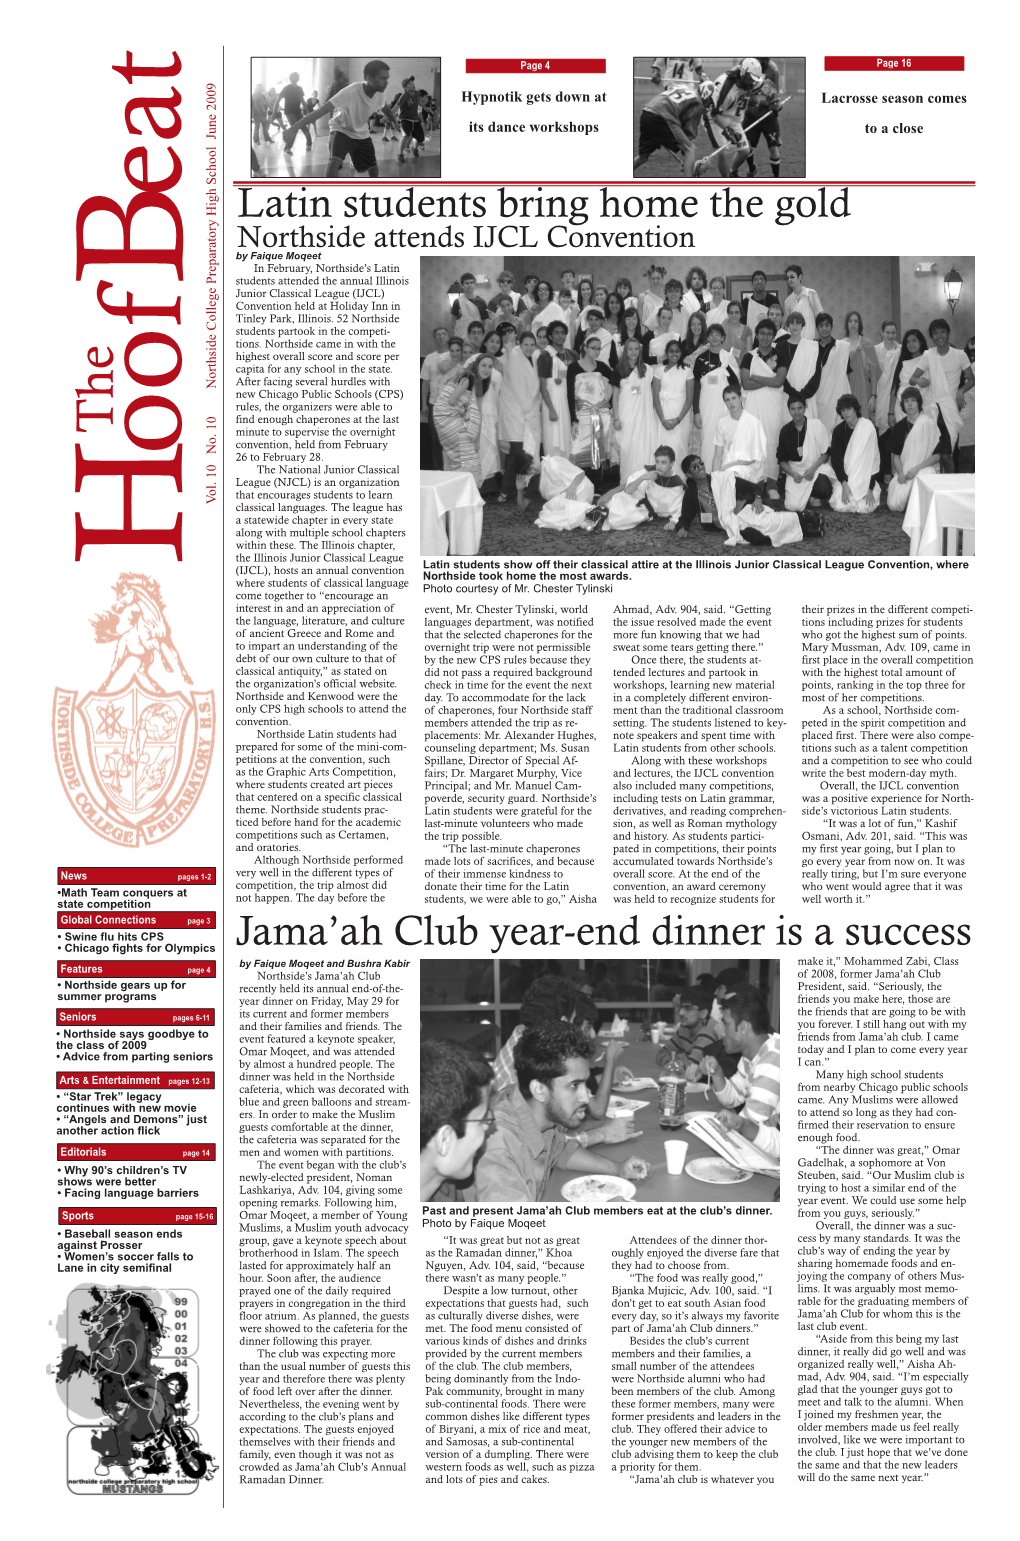 Latin Students Bring Home the Gold Jama'ah Club Year-End Dinner Is A